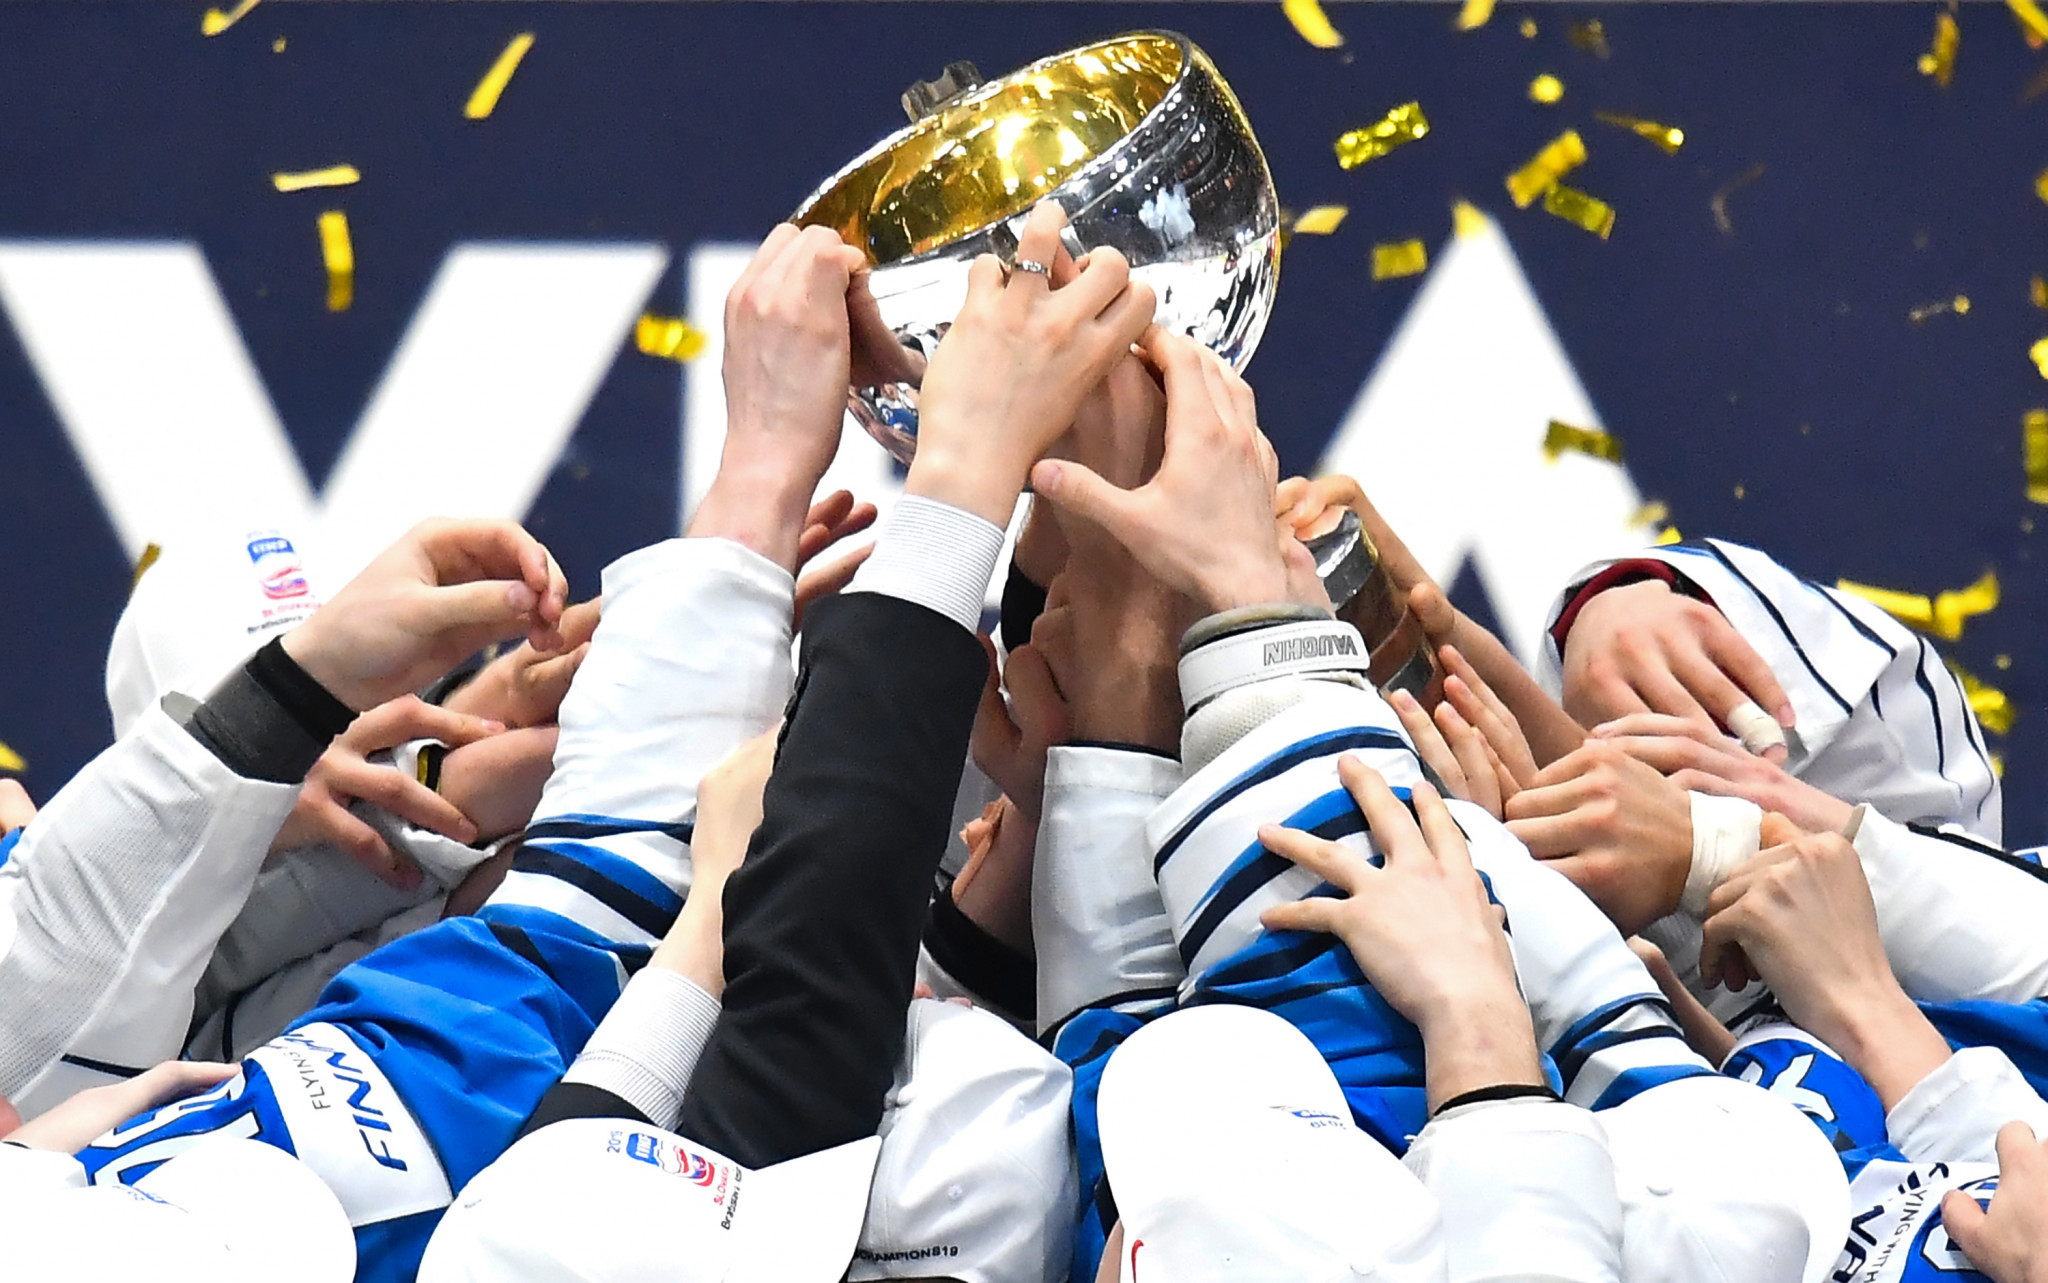 Finland will be looking to defend their title at the 2020 IIHF World Championship ©Getty Images